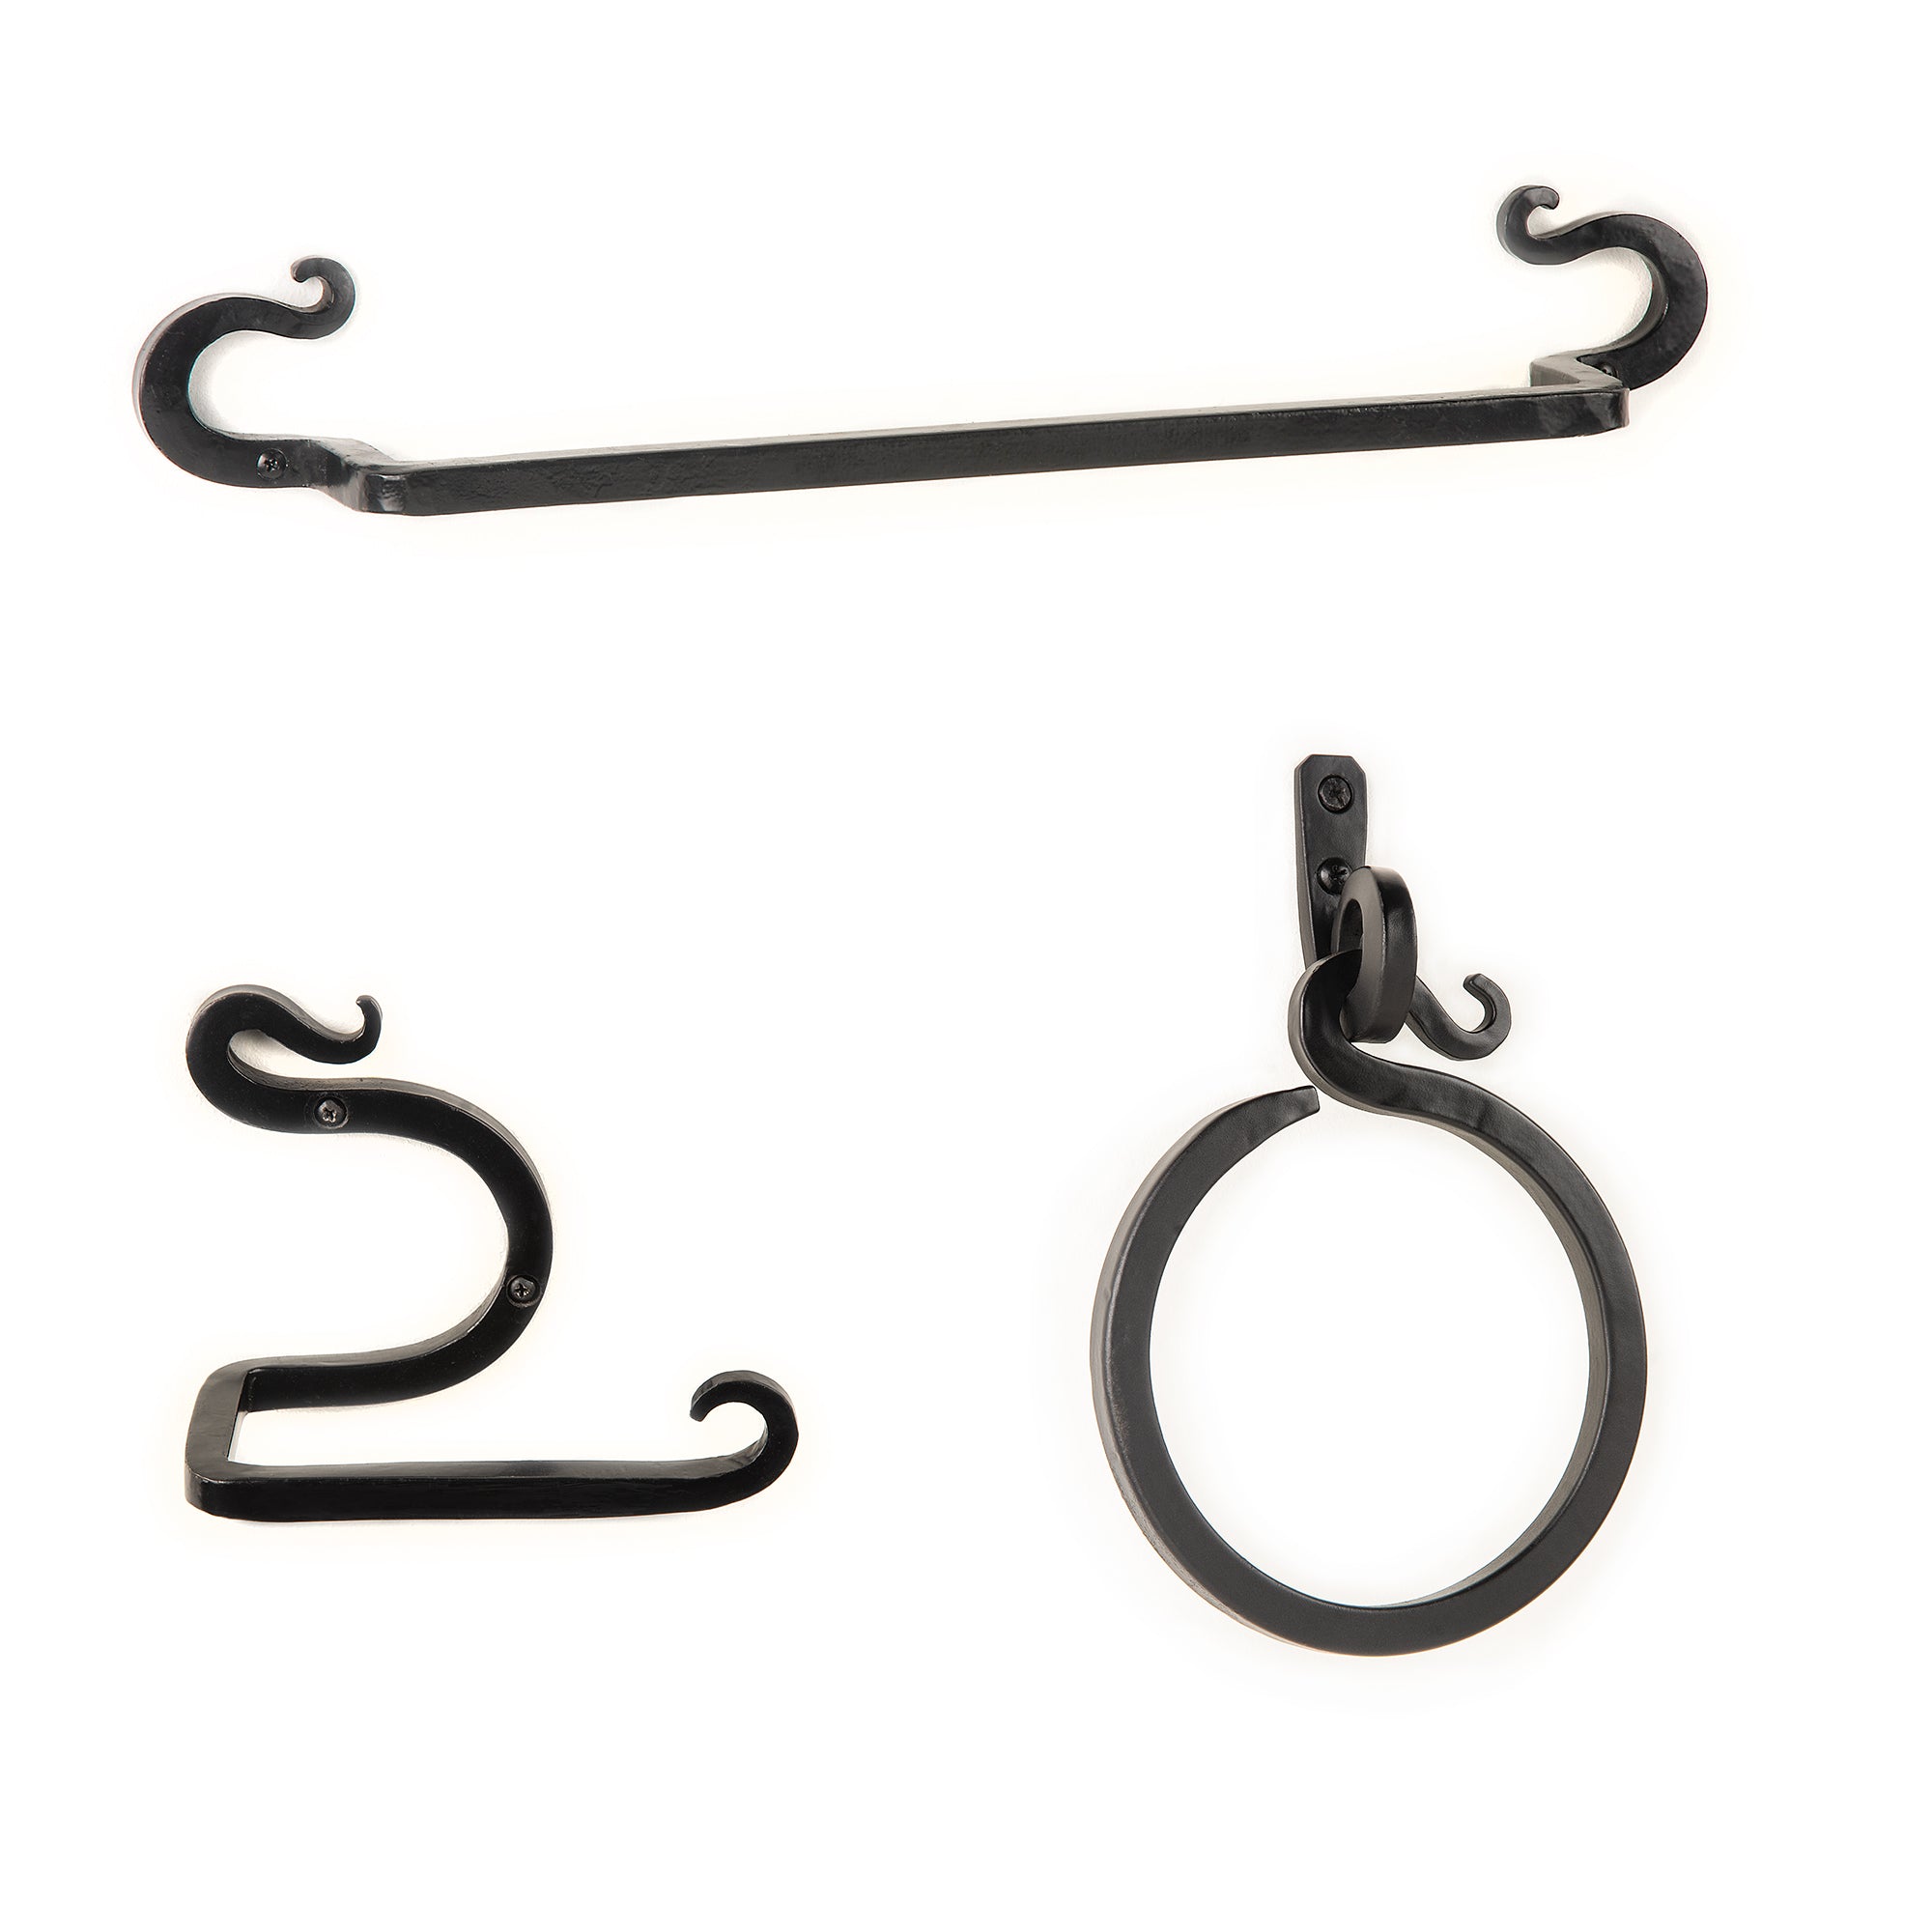 Wrought Cast iron TOWEL RING | vintage rustic | industrial antique iron |  towel holder | wall mount bathroom | toilet lavatory towel holder hook 